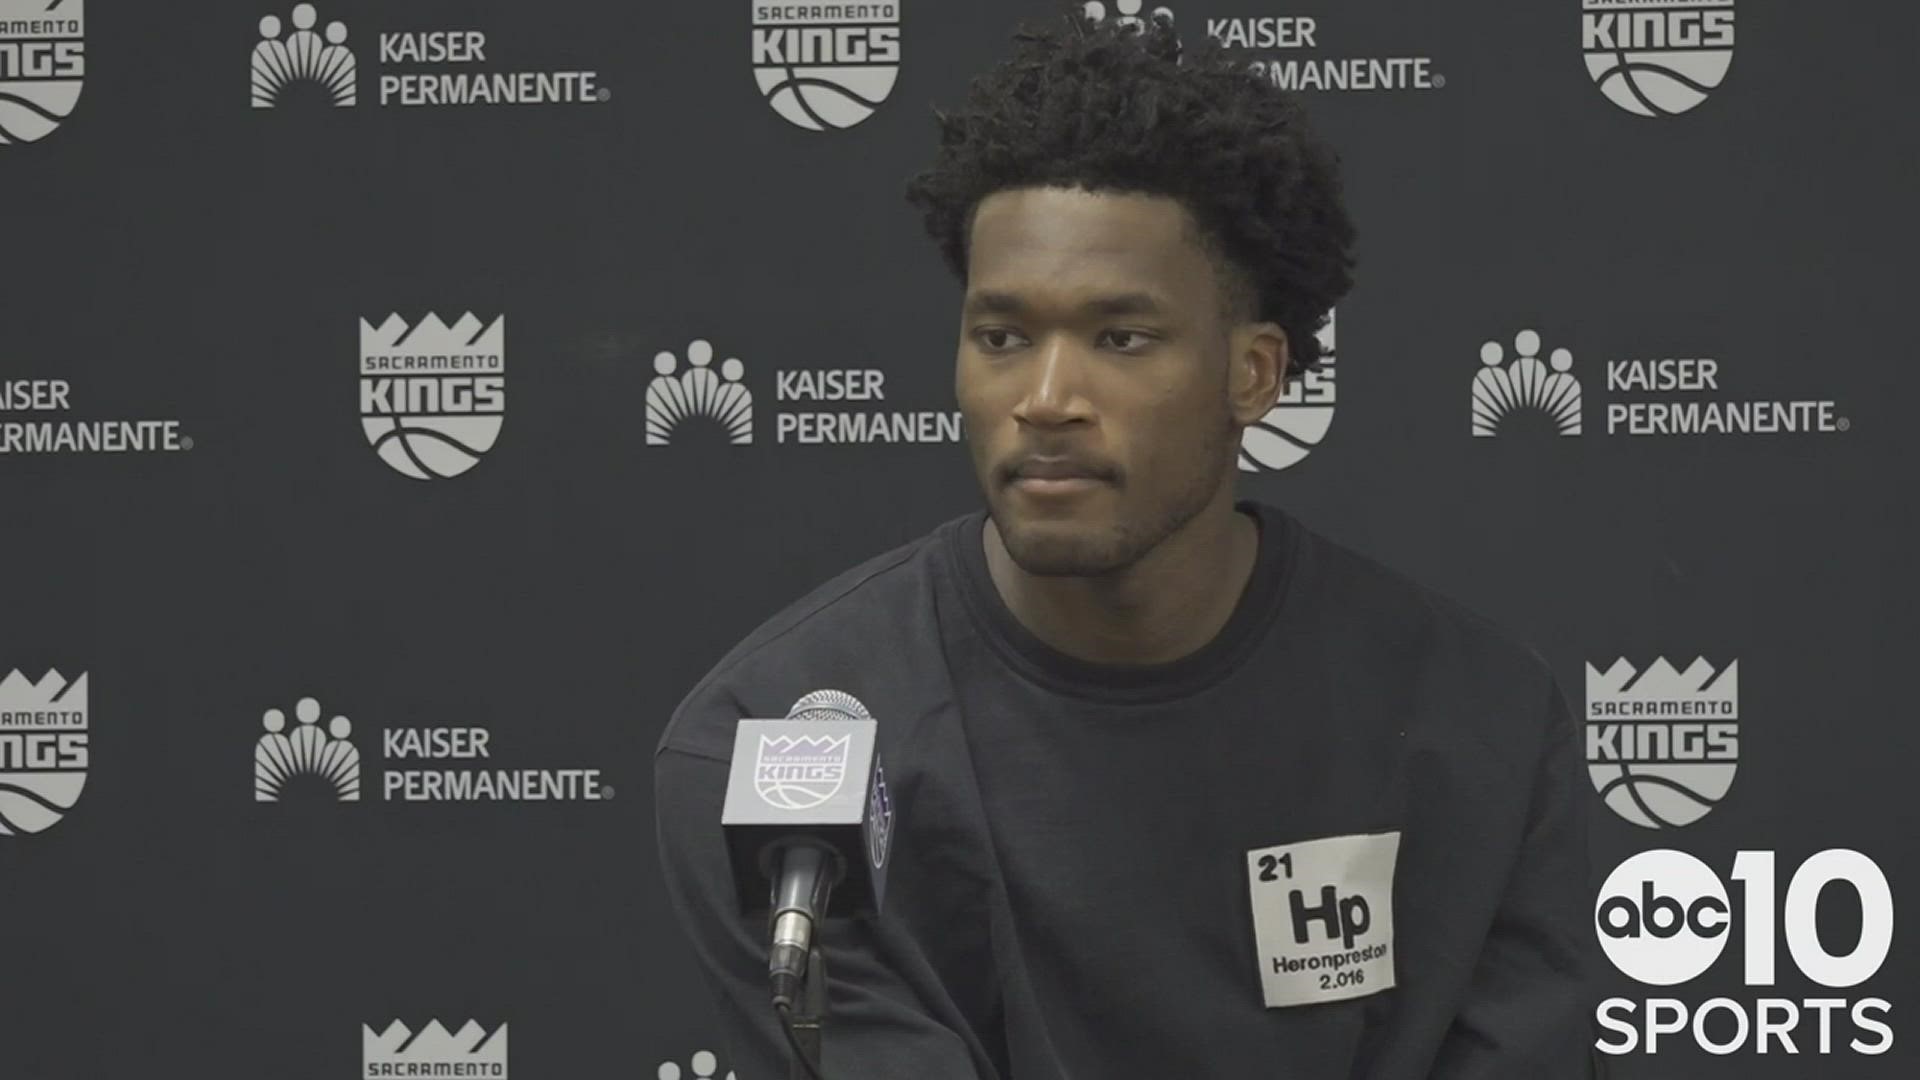 Damian Jones on the Kings' 127-124 OT loss to the Phoenix Suns, the fight his team showed down the stretch and losing Domantas Sabonis to a knee injury.